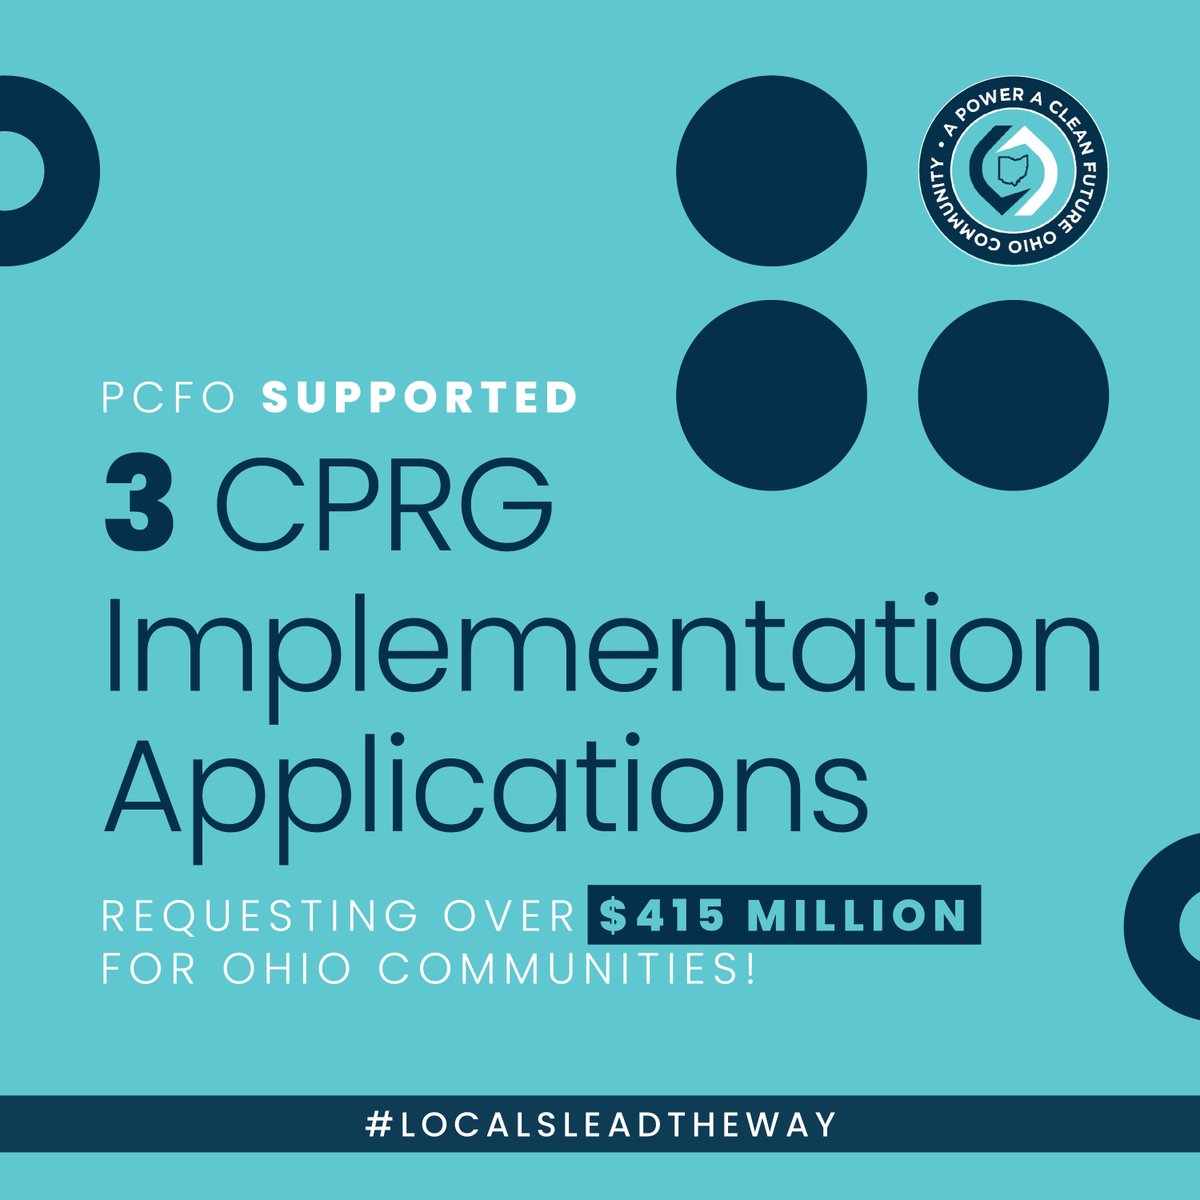 New grant applications submitted by @CityOfCincy, @OKIRCOG, @CityofCleveland, @cuyahogacounty, & @ColumbusGov could bring more than $415 million to Ohio communities to reduce emissions! Shoutout to the PCFO team & partners for supporting this important work! #LocalsLeadTheWay